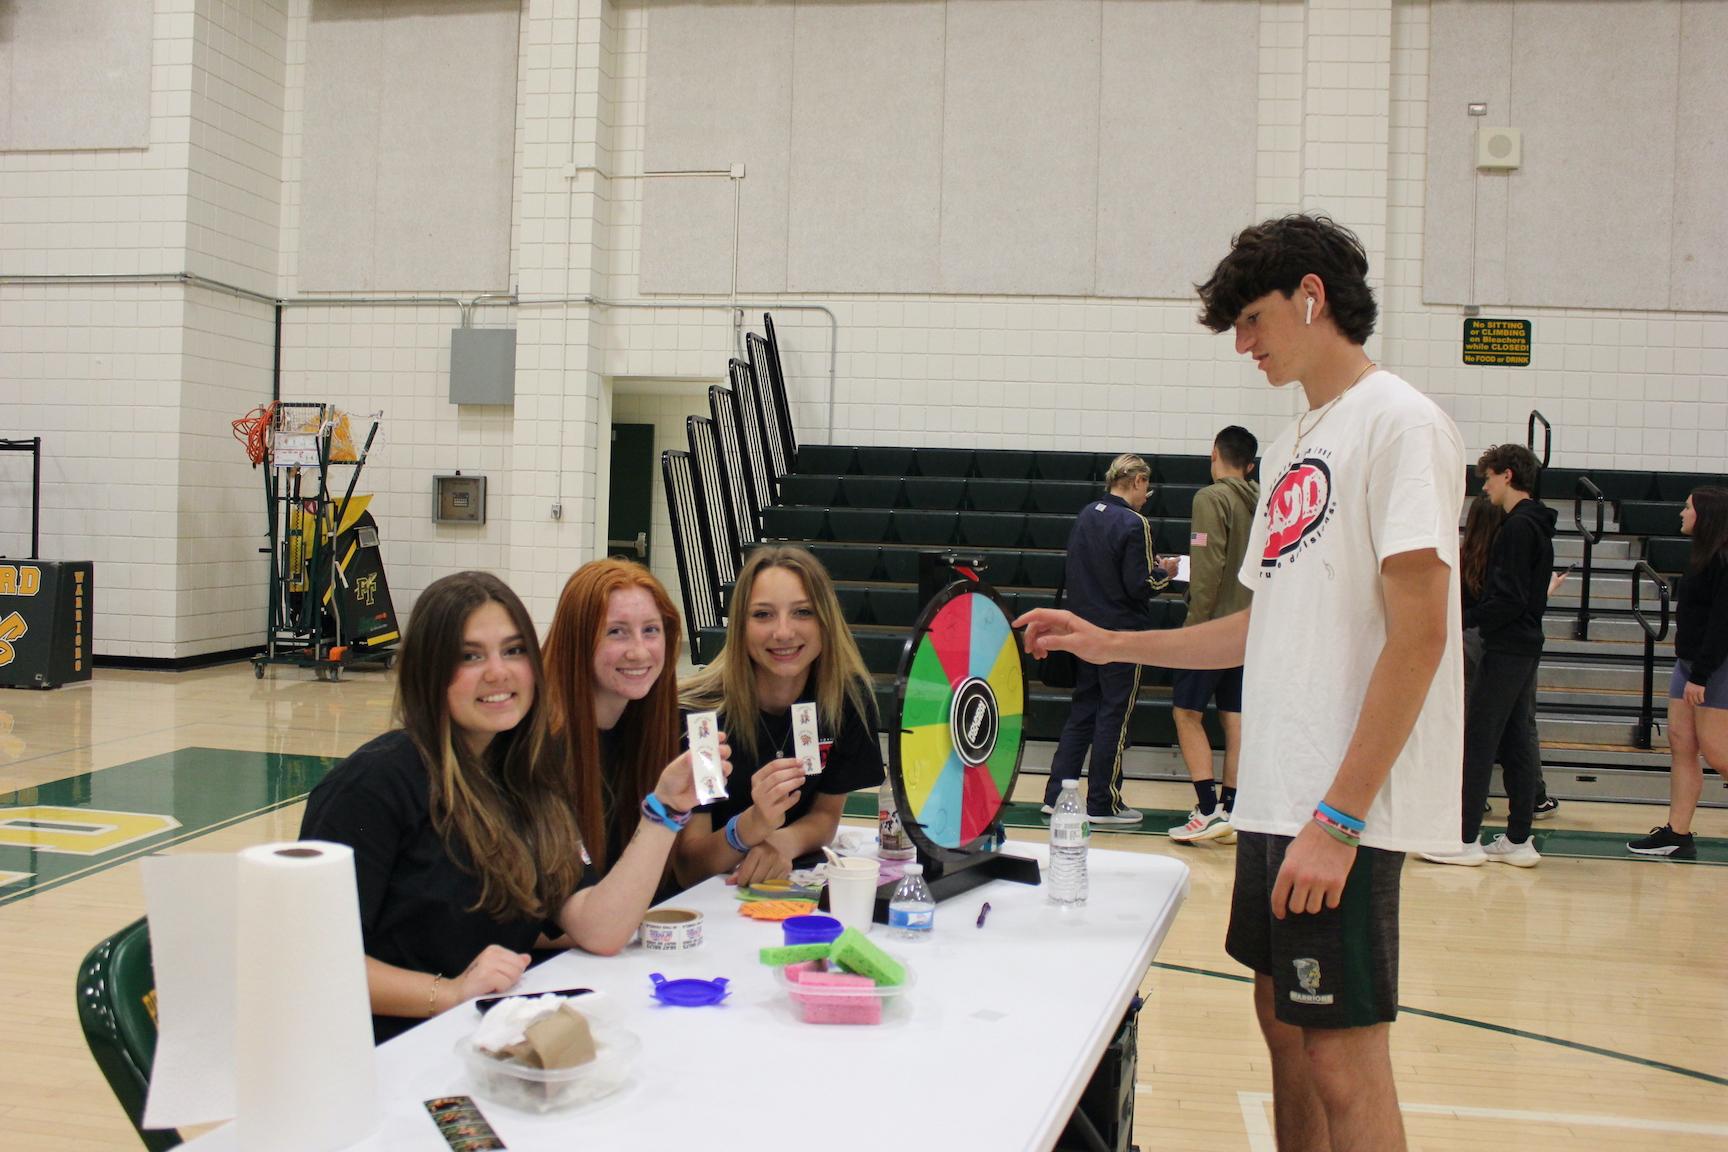 Ian Temple spins the wheels to win a temporary tattoo from Brooklyn Harrison, Gabby Michael, Rease Solomon